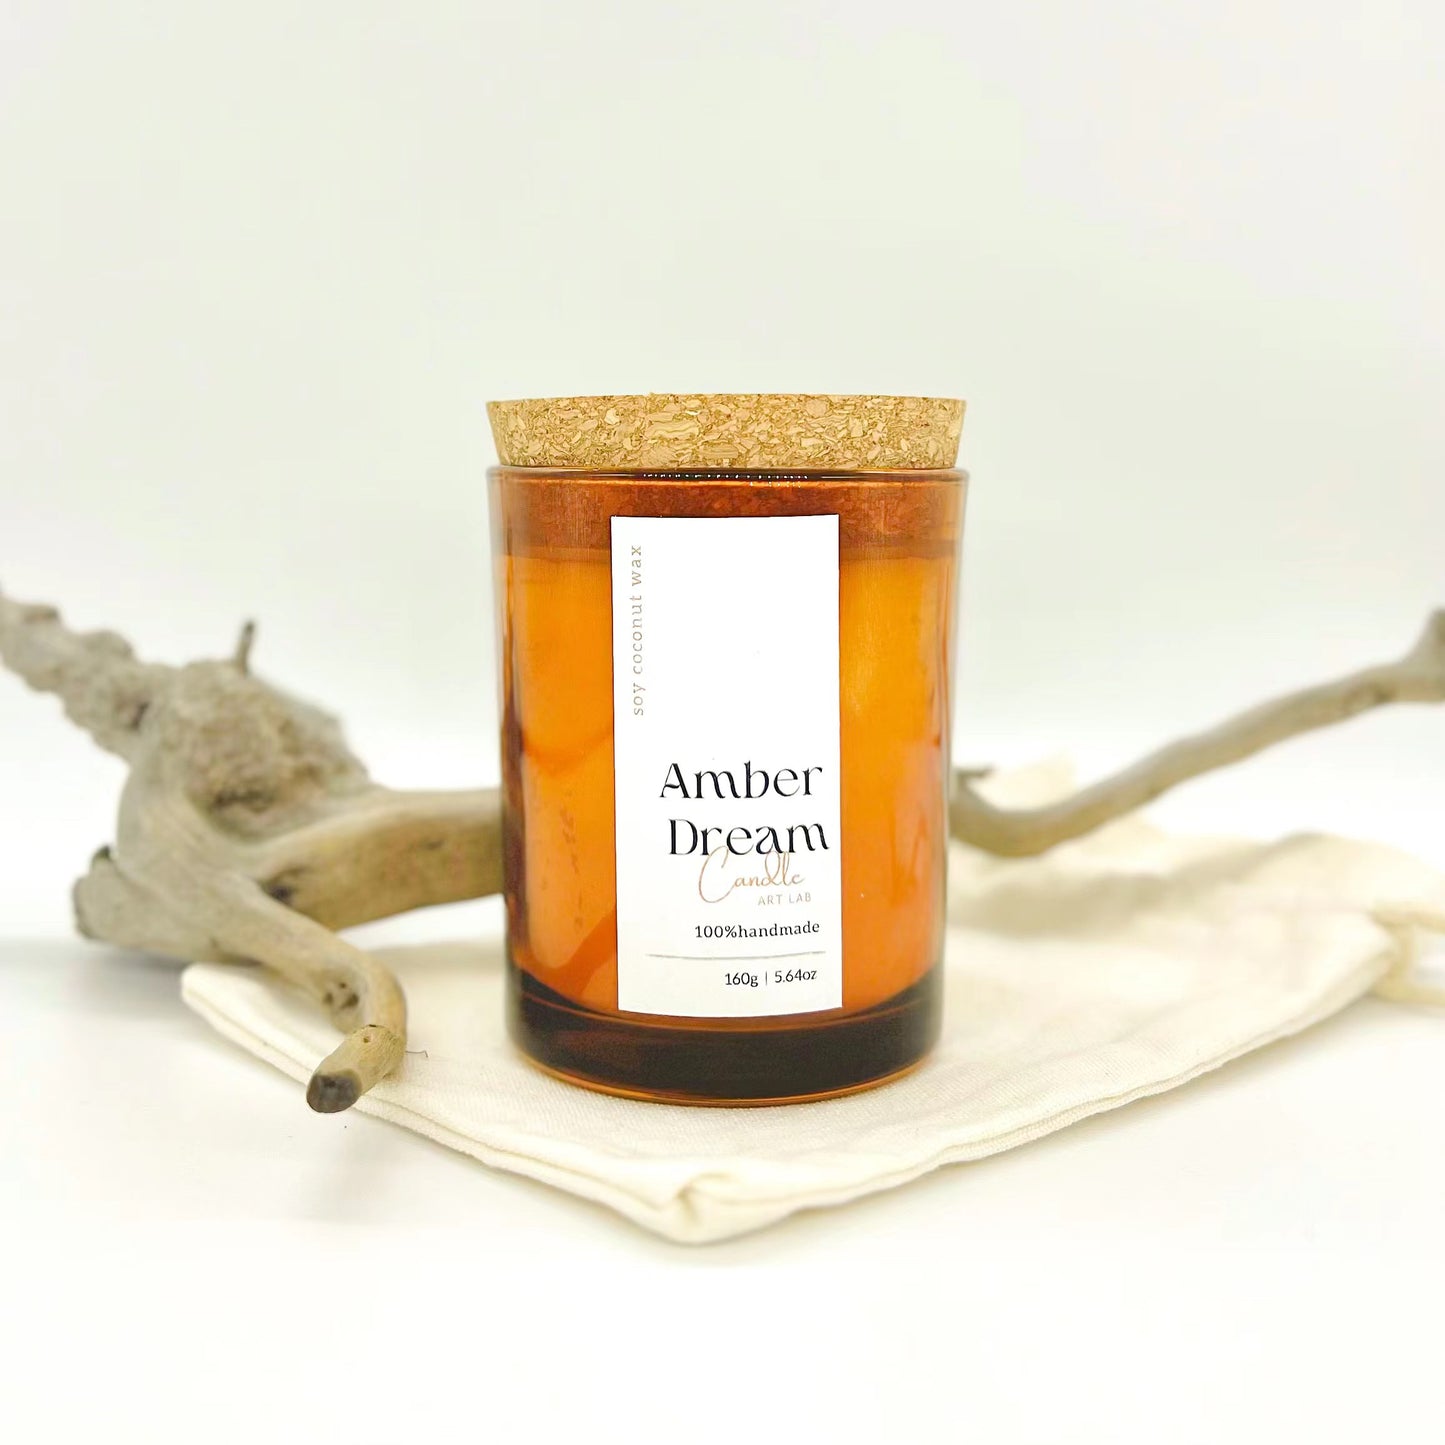 Amber Dream(LIMITED EDITION)